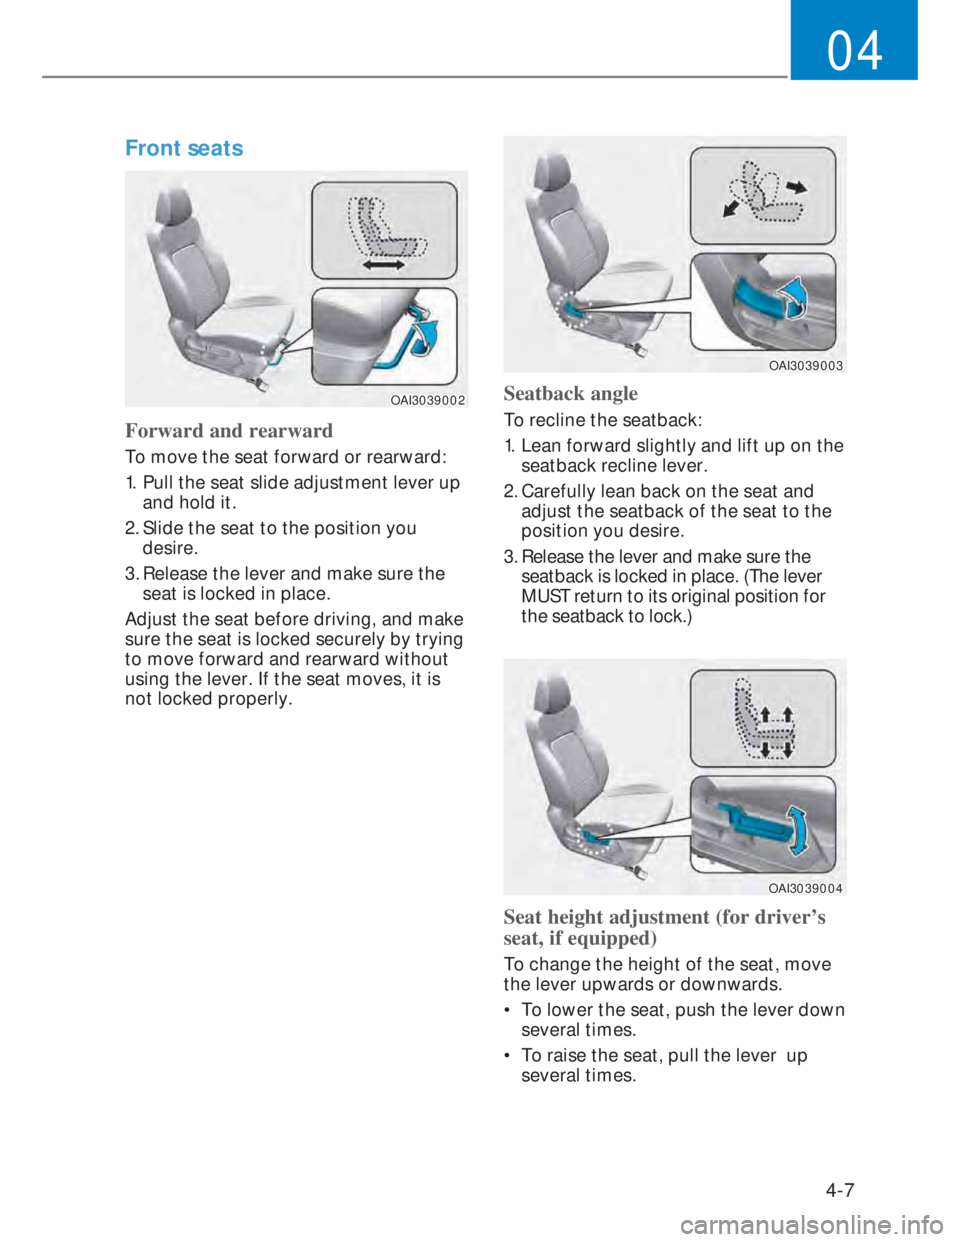 HYUNDAI I20 2021 Owners Guide 4-7
04
Front seats  
OAI3039002OAI3039002
Forward and rearward
To move the seat forward or rearward:
1.  Pull the seat slide adjustment lever up 
and hold it.
2. Slide the seat to the position you 
de